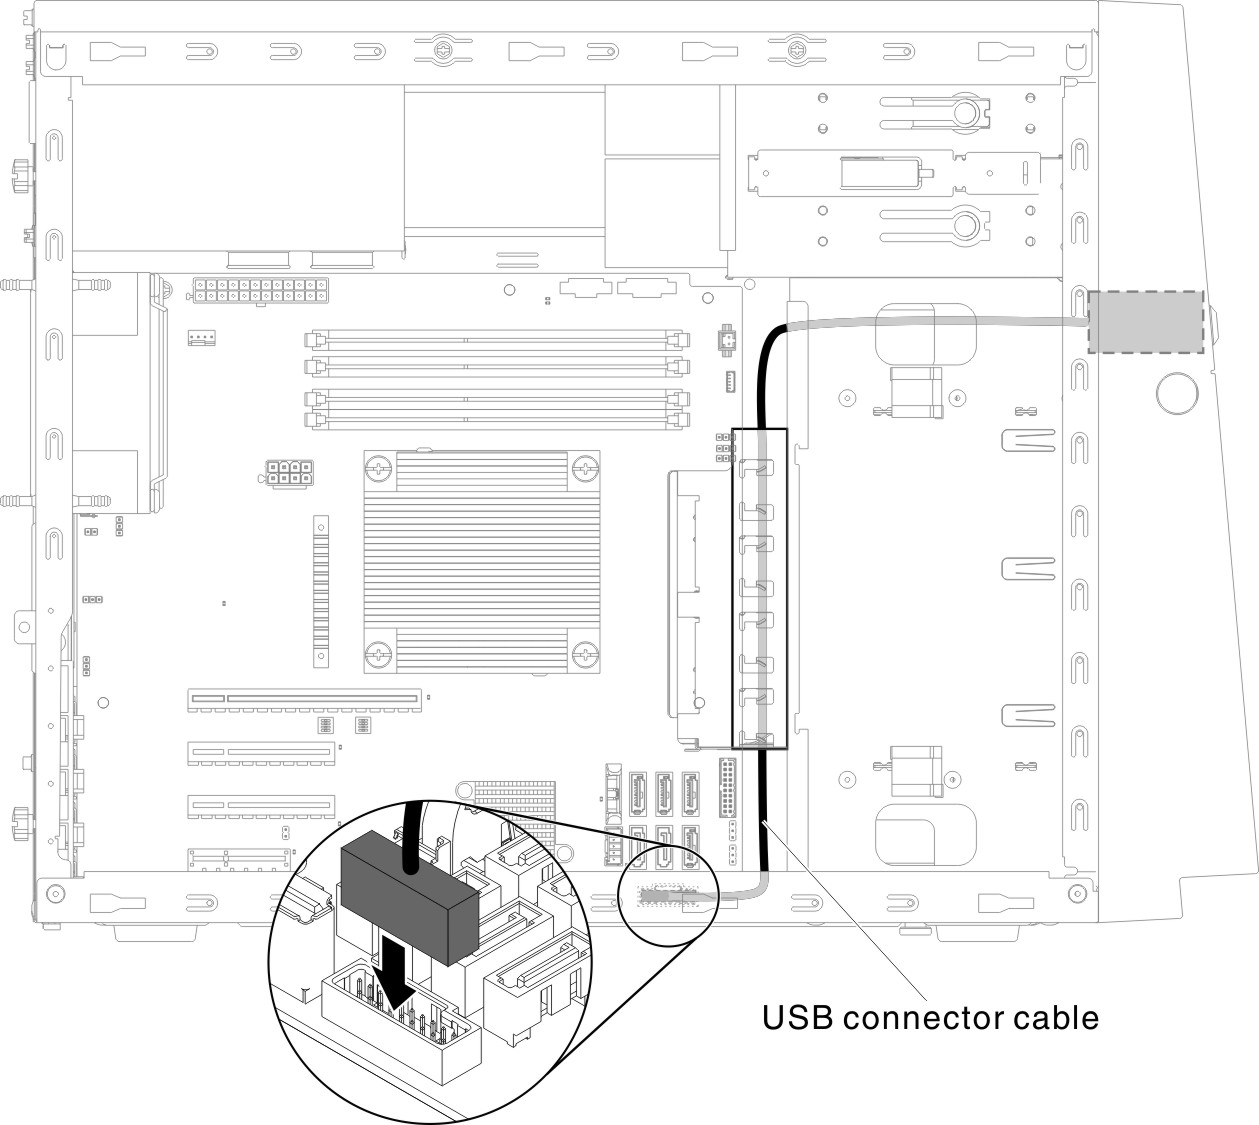 Front USB cable installation for 4U server model with non-hot-swap power supplies